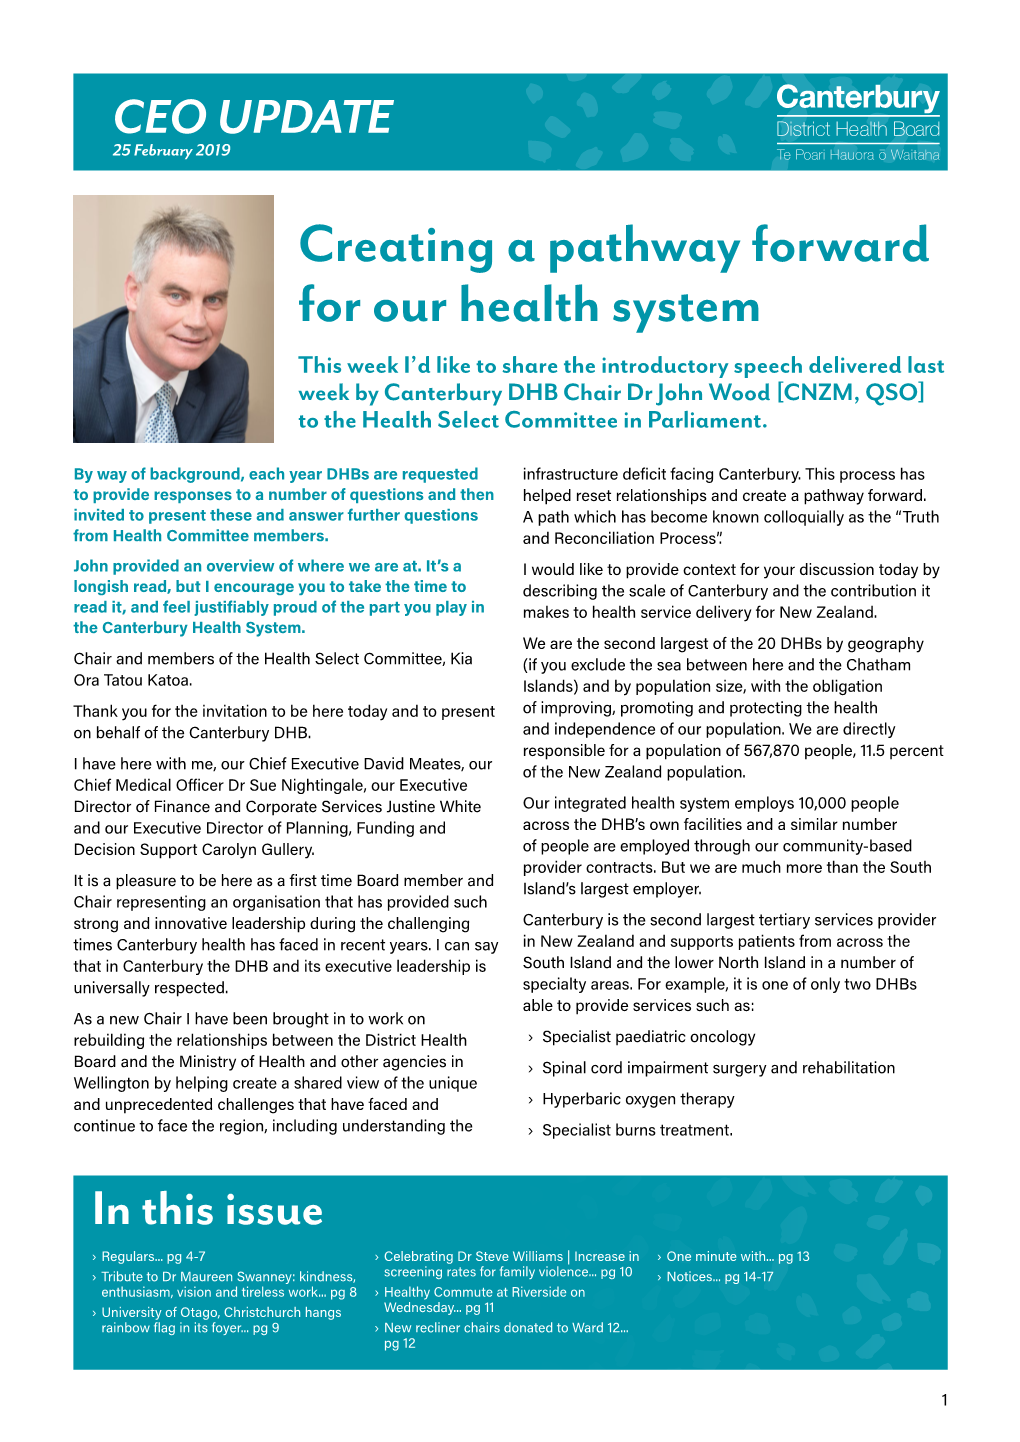 Creating a Pathway Forward for Our Health System